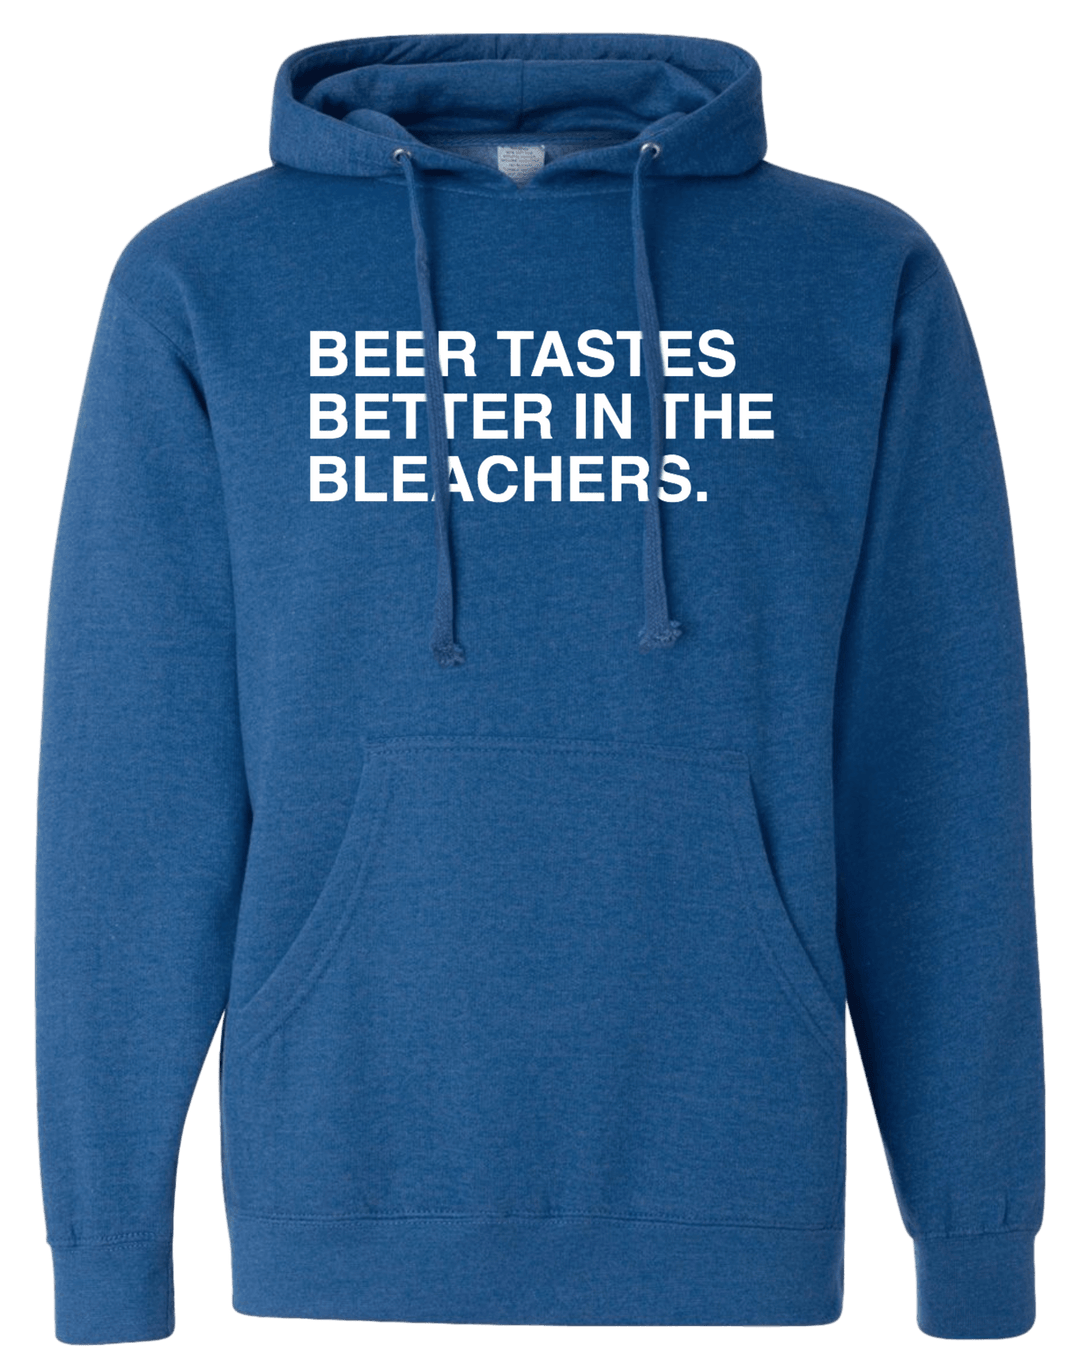 BEER TASTES BETTER IN THE BLEACHERS. (HOODIE) - OBVIOUS SHIRTS.